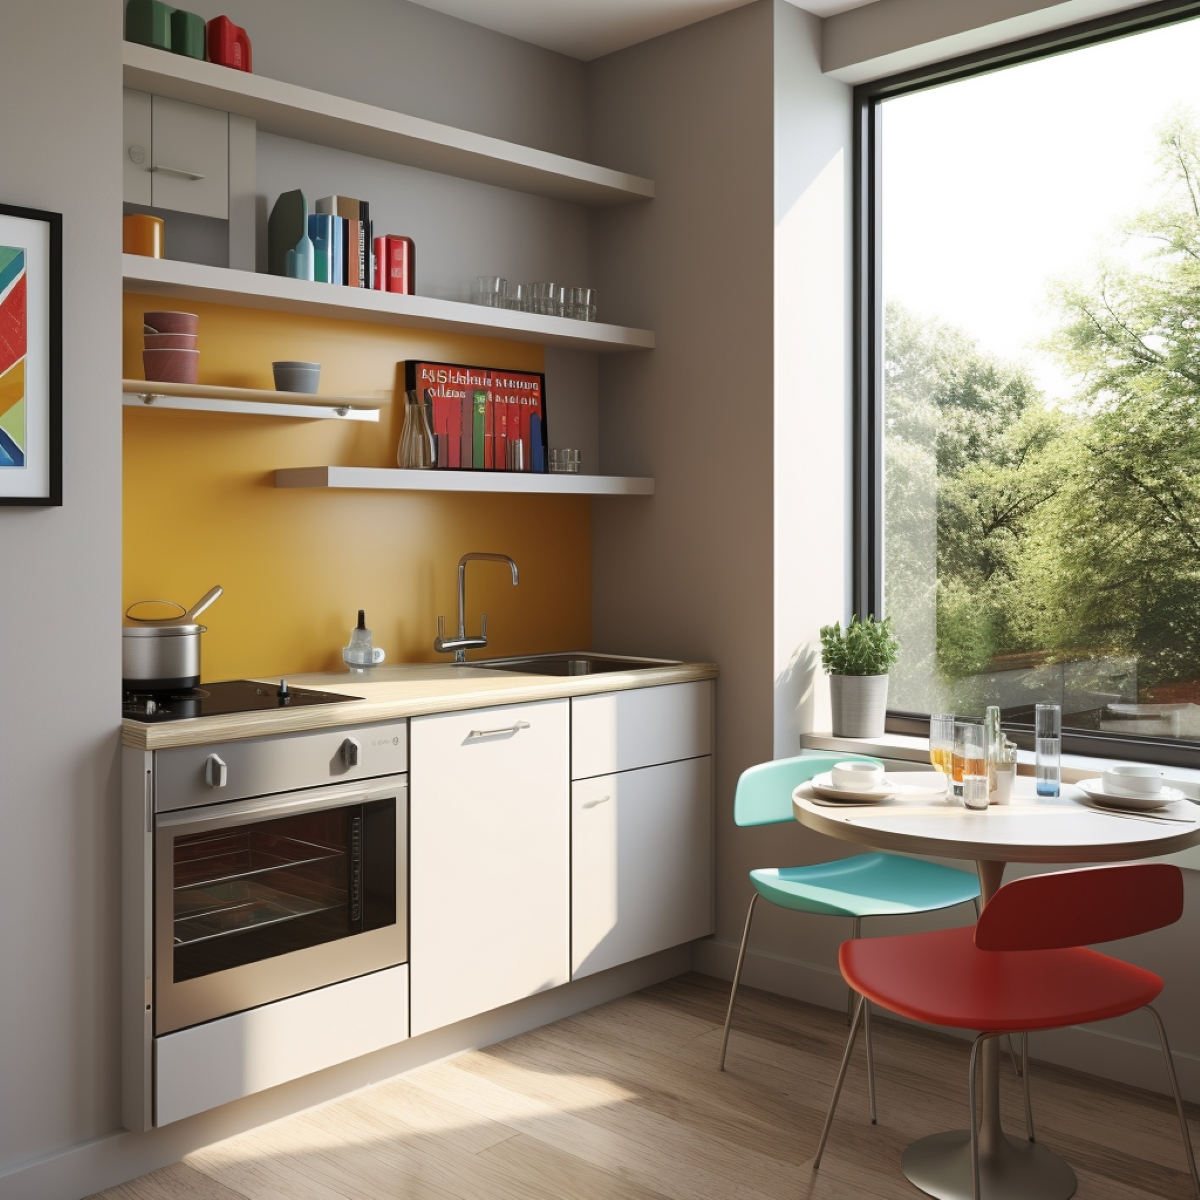 Small kitchenette with yellow wall.